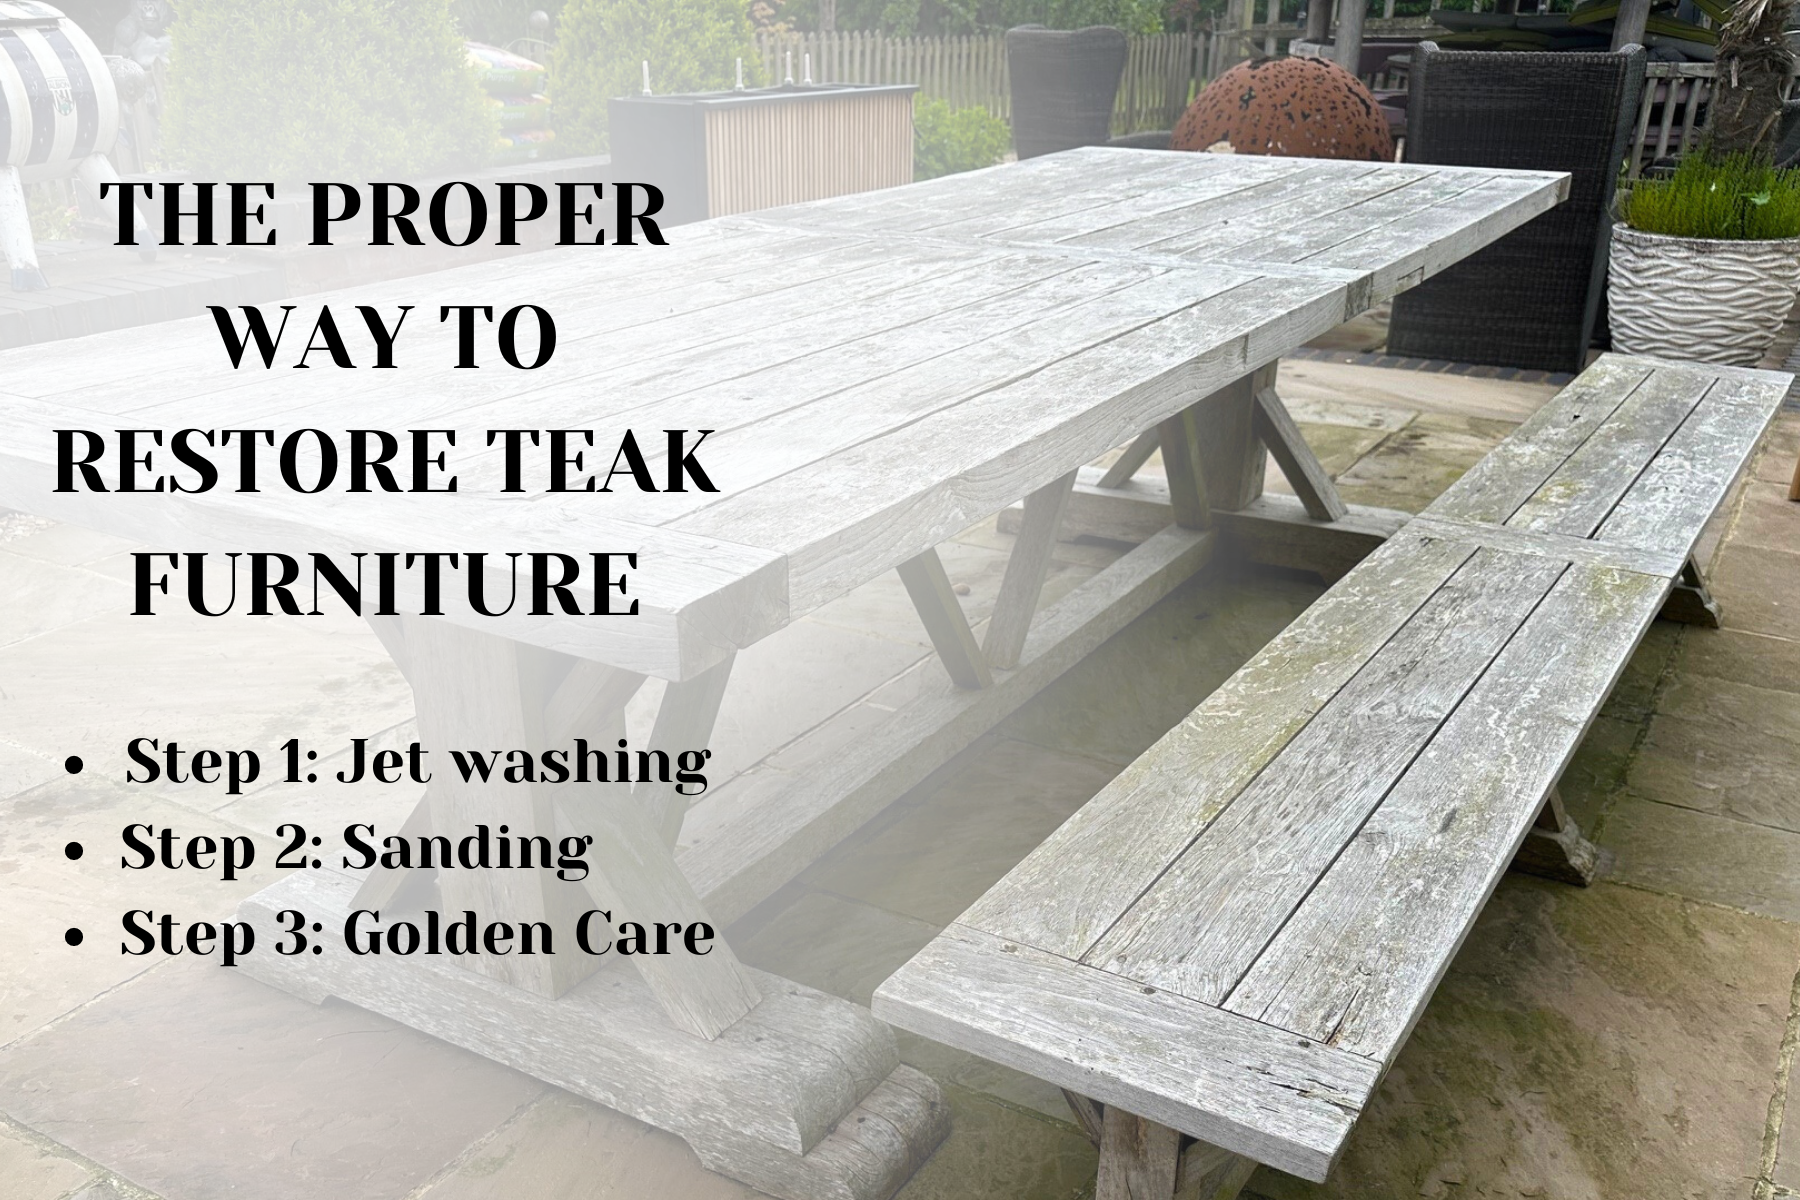 Read all about how to properly restore your teak furniture